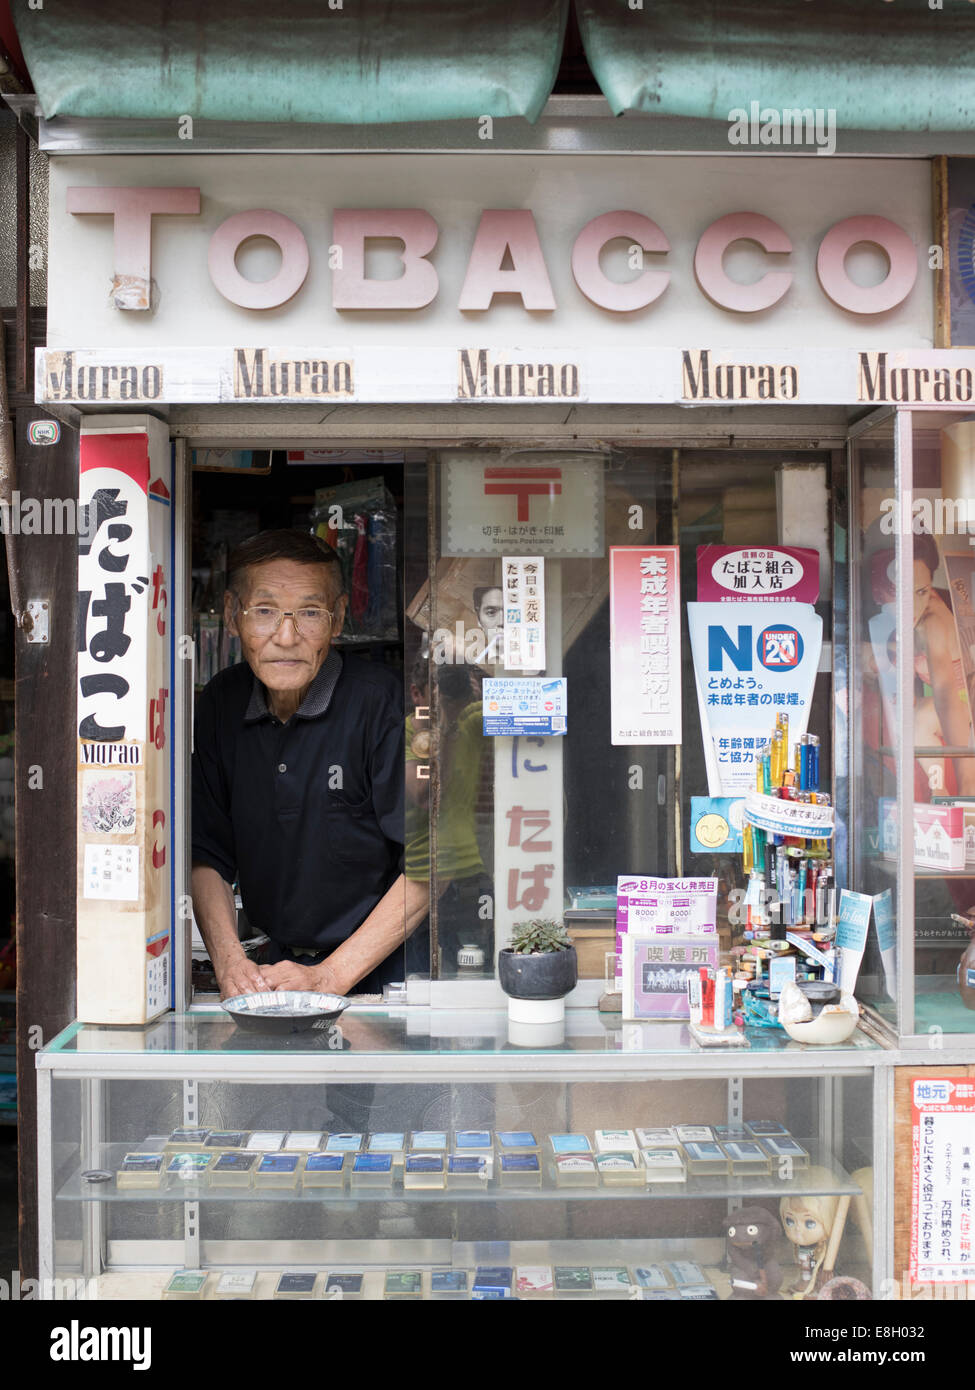 Murao (83) a tobacconist in his store on Naoshima, Japan Stock Photo